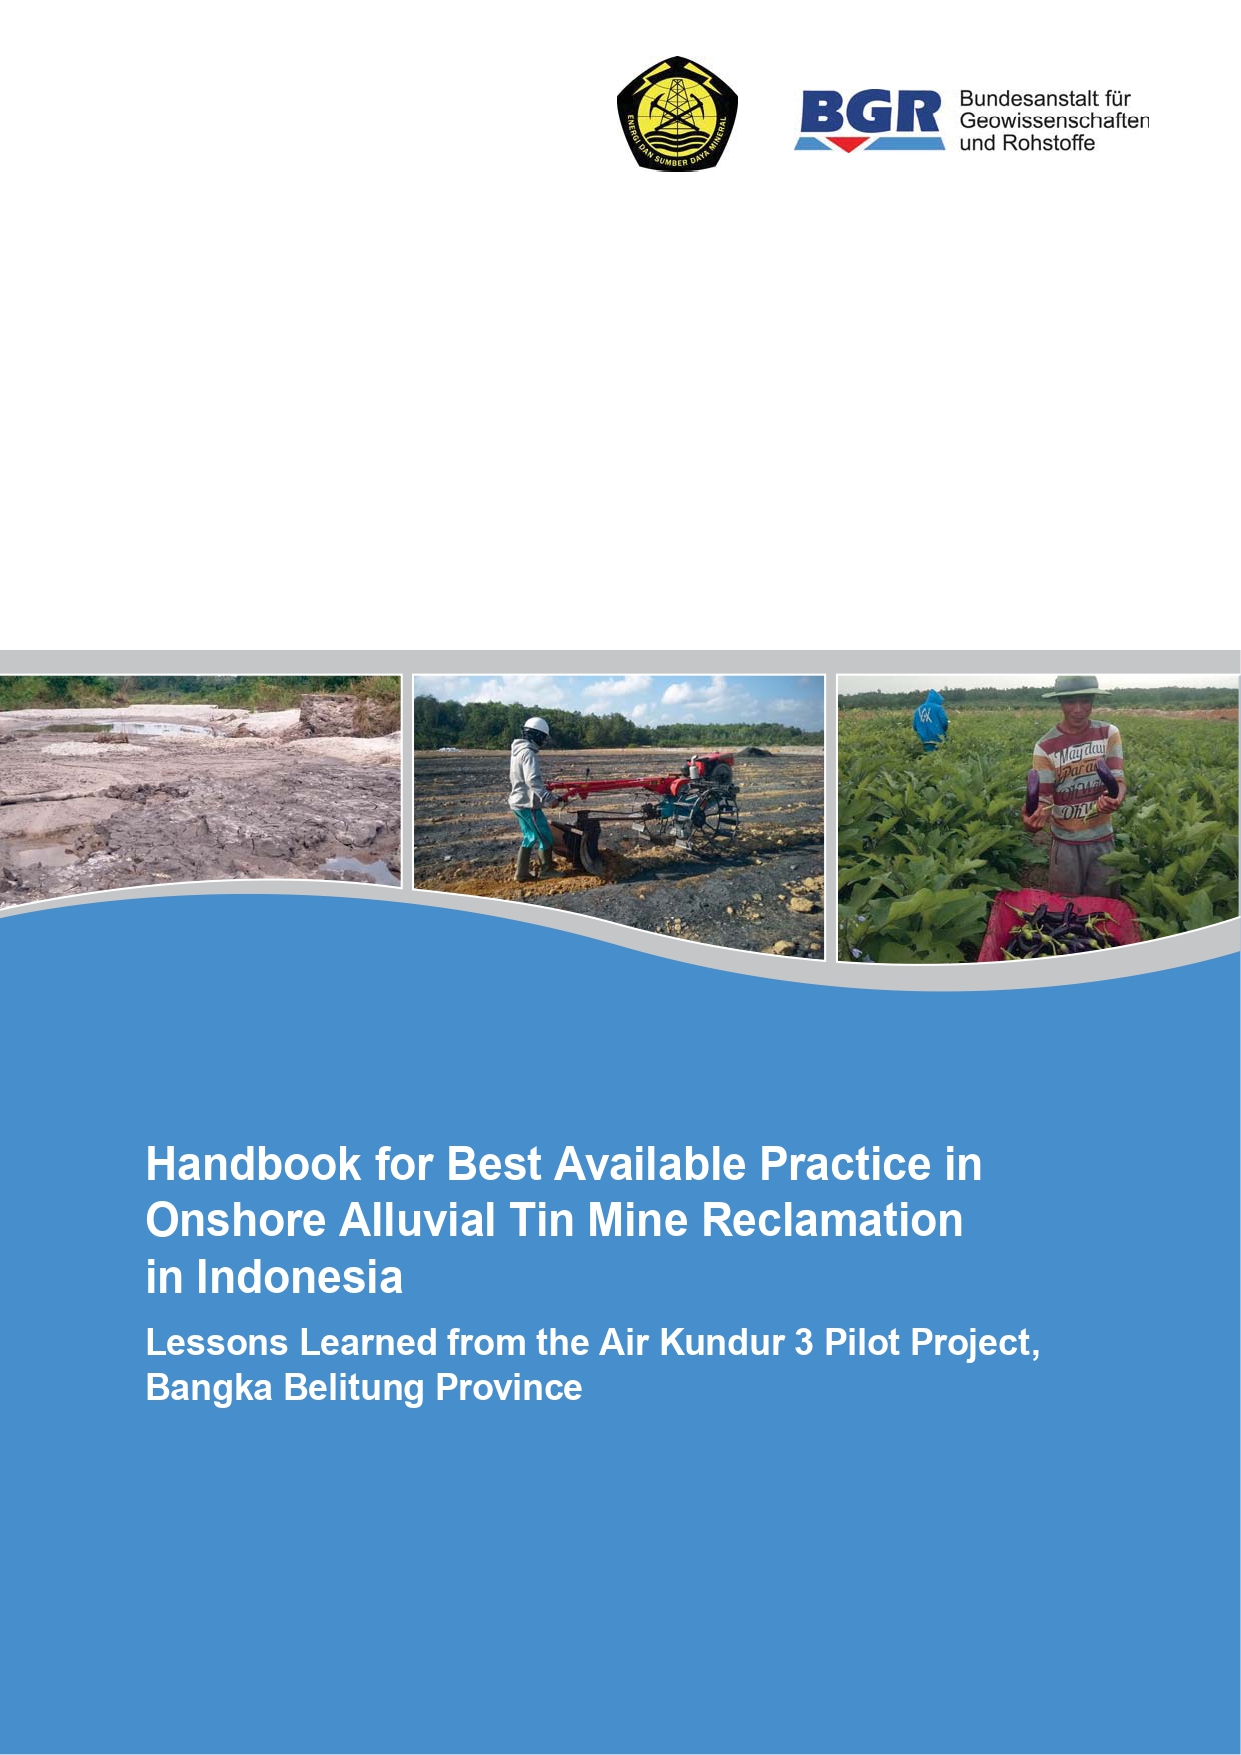 Handbook for Best Available Practice in Onshore Alluvial Tin Mine Reclamation in Indonesia